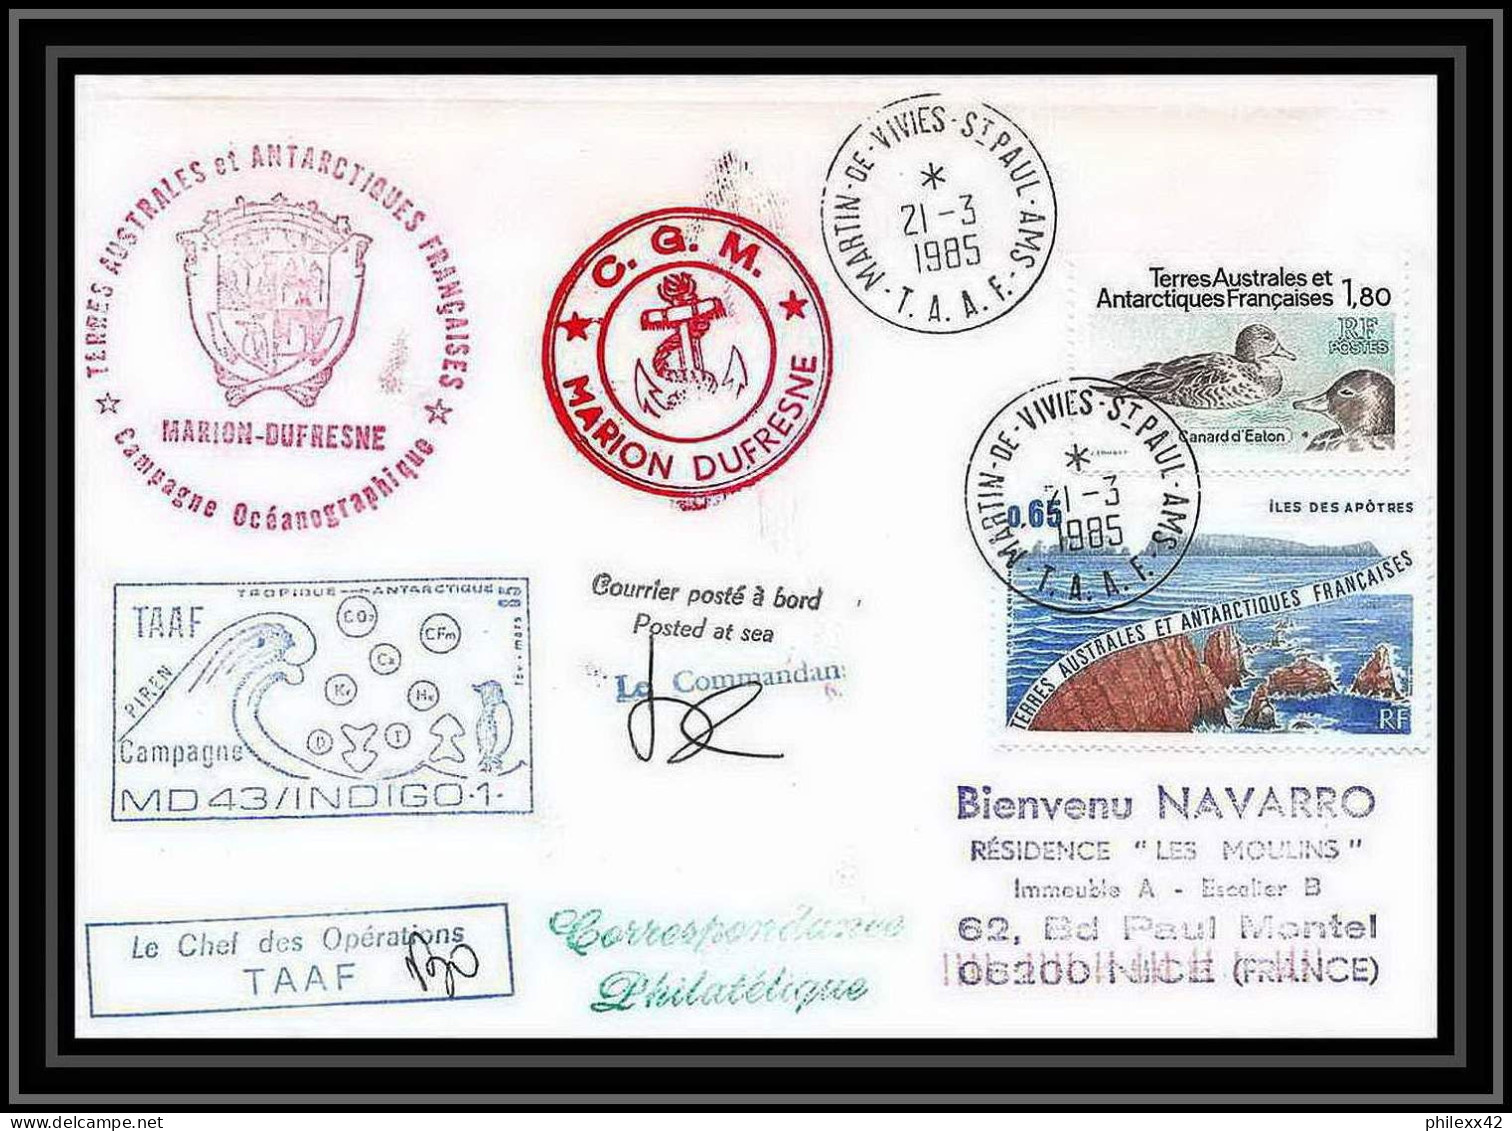 1519 Campagne Md 43 Indigo 1 21/3/1985 Signé Signed Marion Dufresne TAAF Antarctic Terres Australes Lettre (cover) - Spedizioni Antartiche